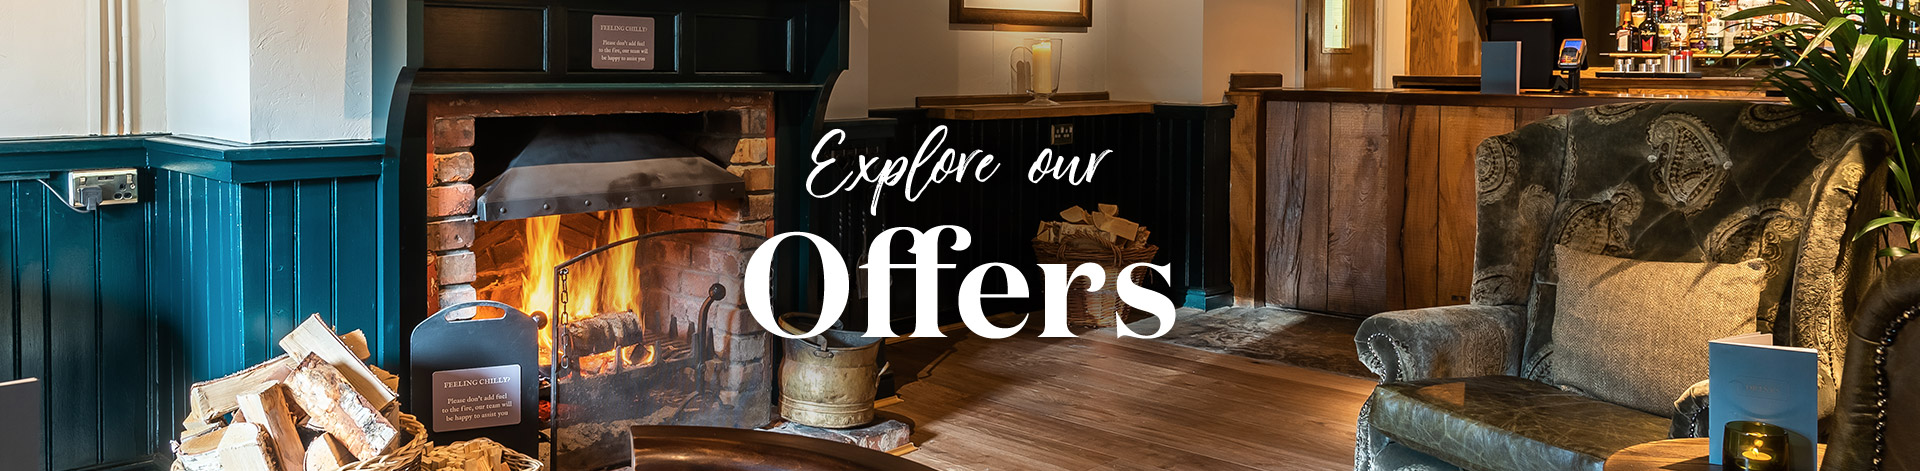 Our latest offers at The Talbot